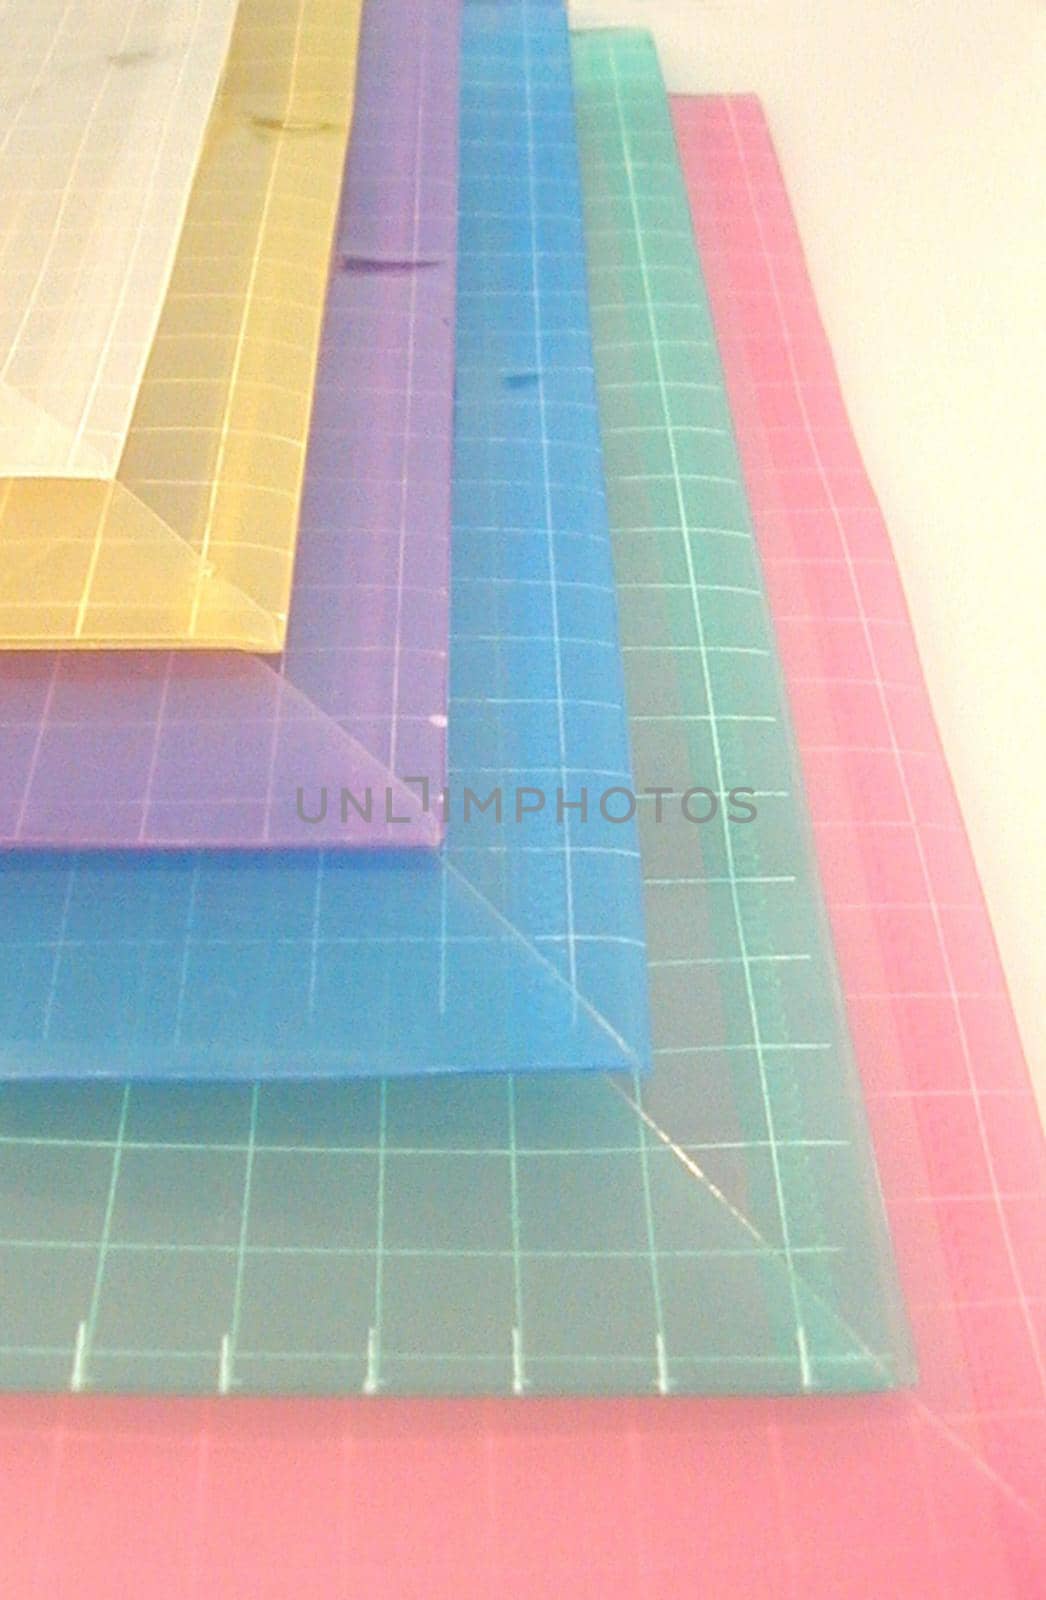 Sheets of colorful plastic viewed one on top of the other in a staggered arrangement of the corners for a decorative pattern